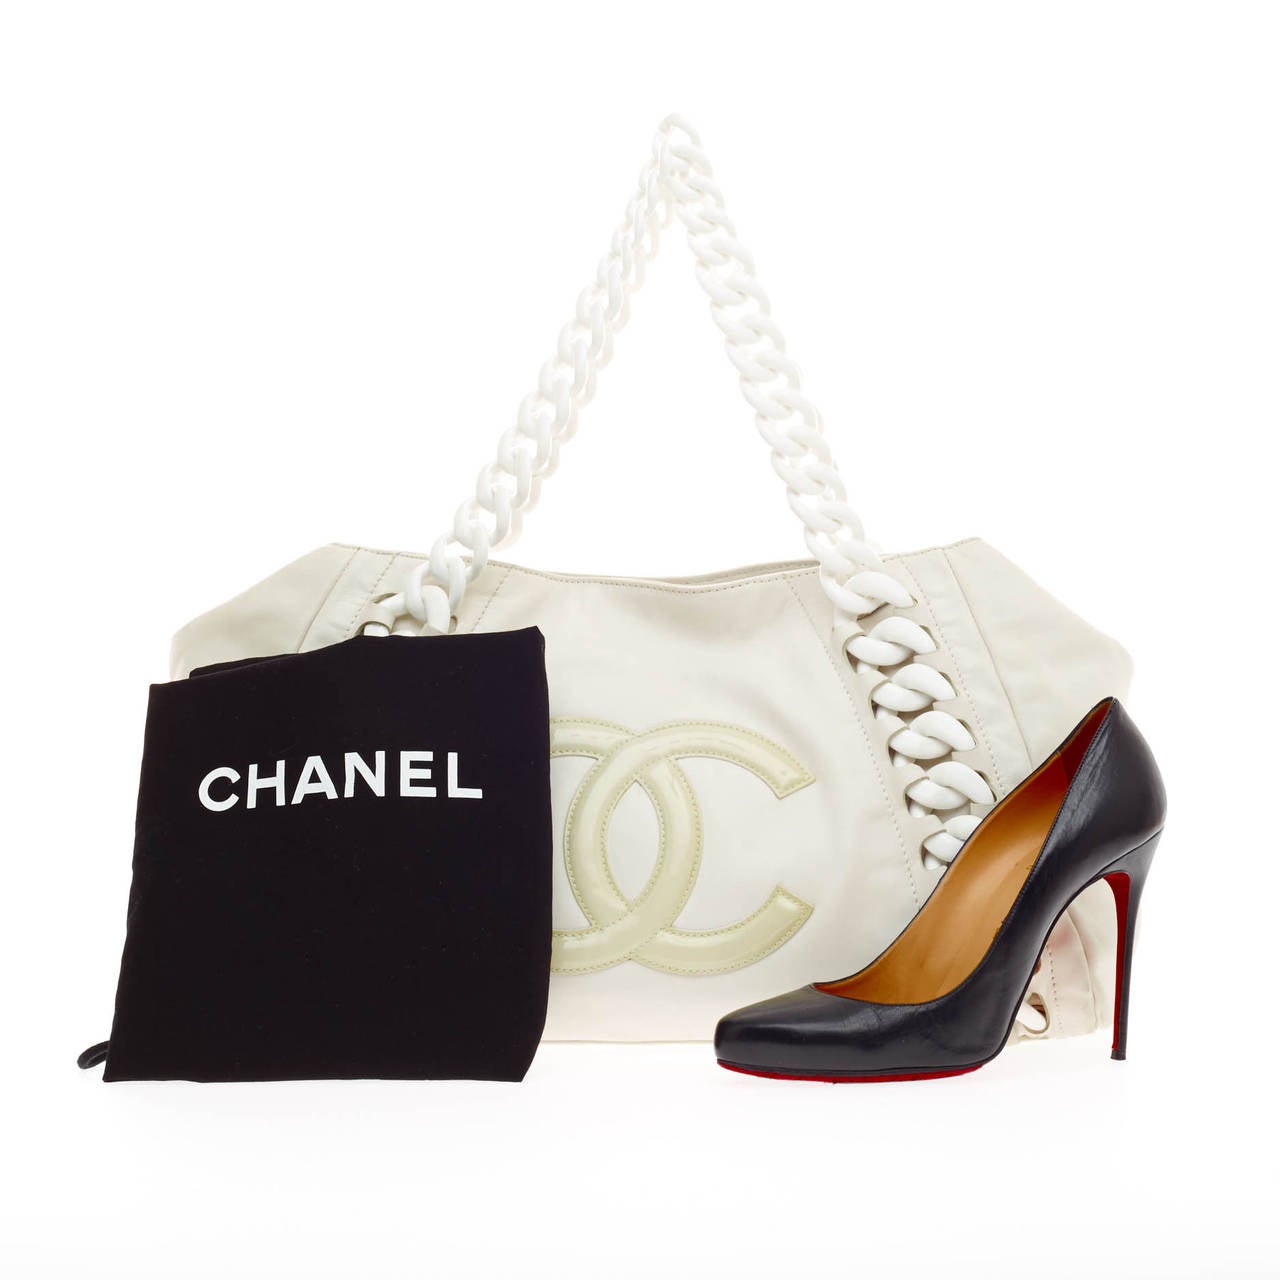 This authentic Chanel Resin Modern Chain Tote Leather showcases a playful, sporty style perfect for avid Chanel lovers. Constructed from sumptuous white leather, this oversized tote features large resin chain link straps and details, patent